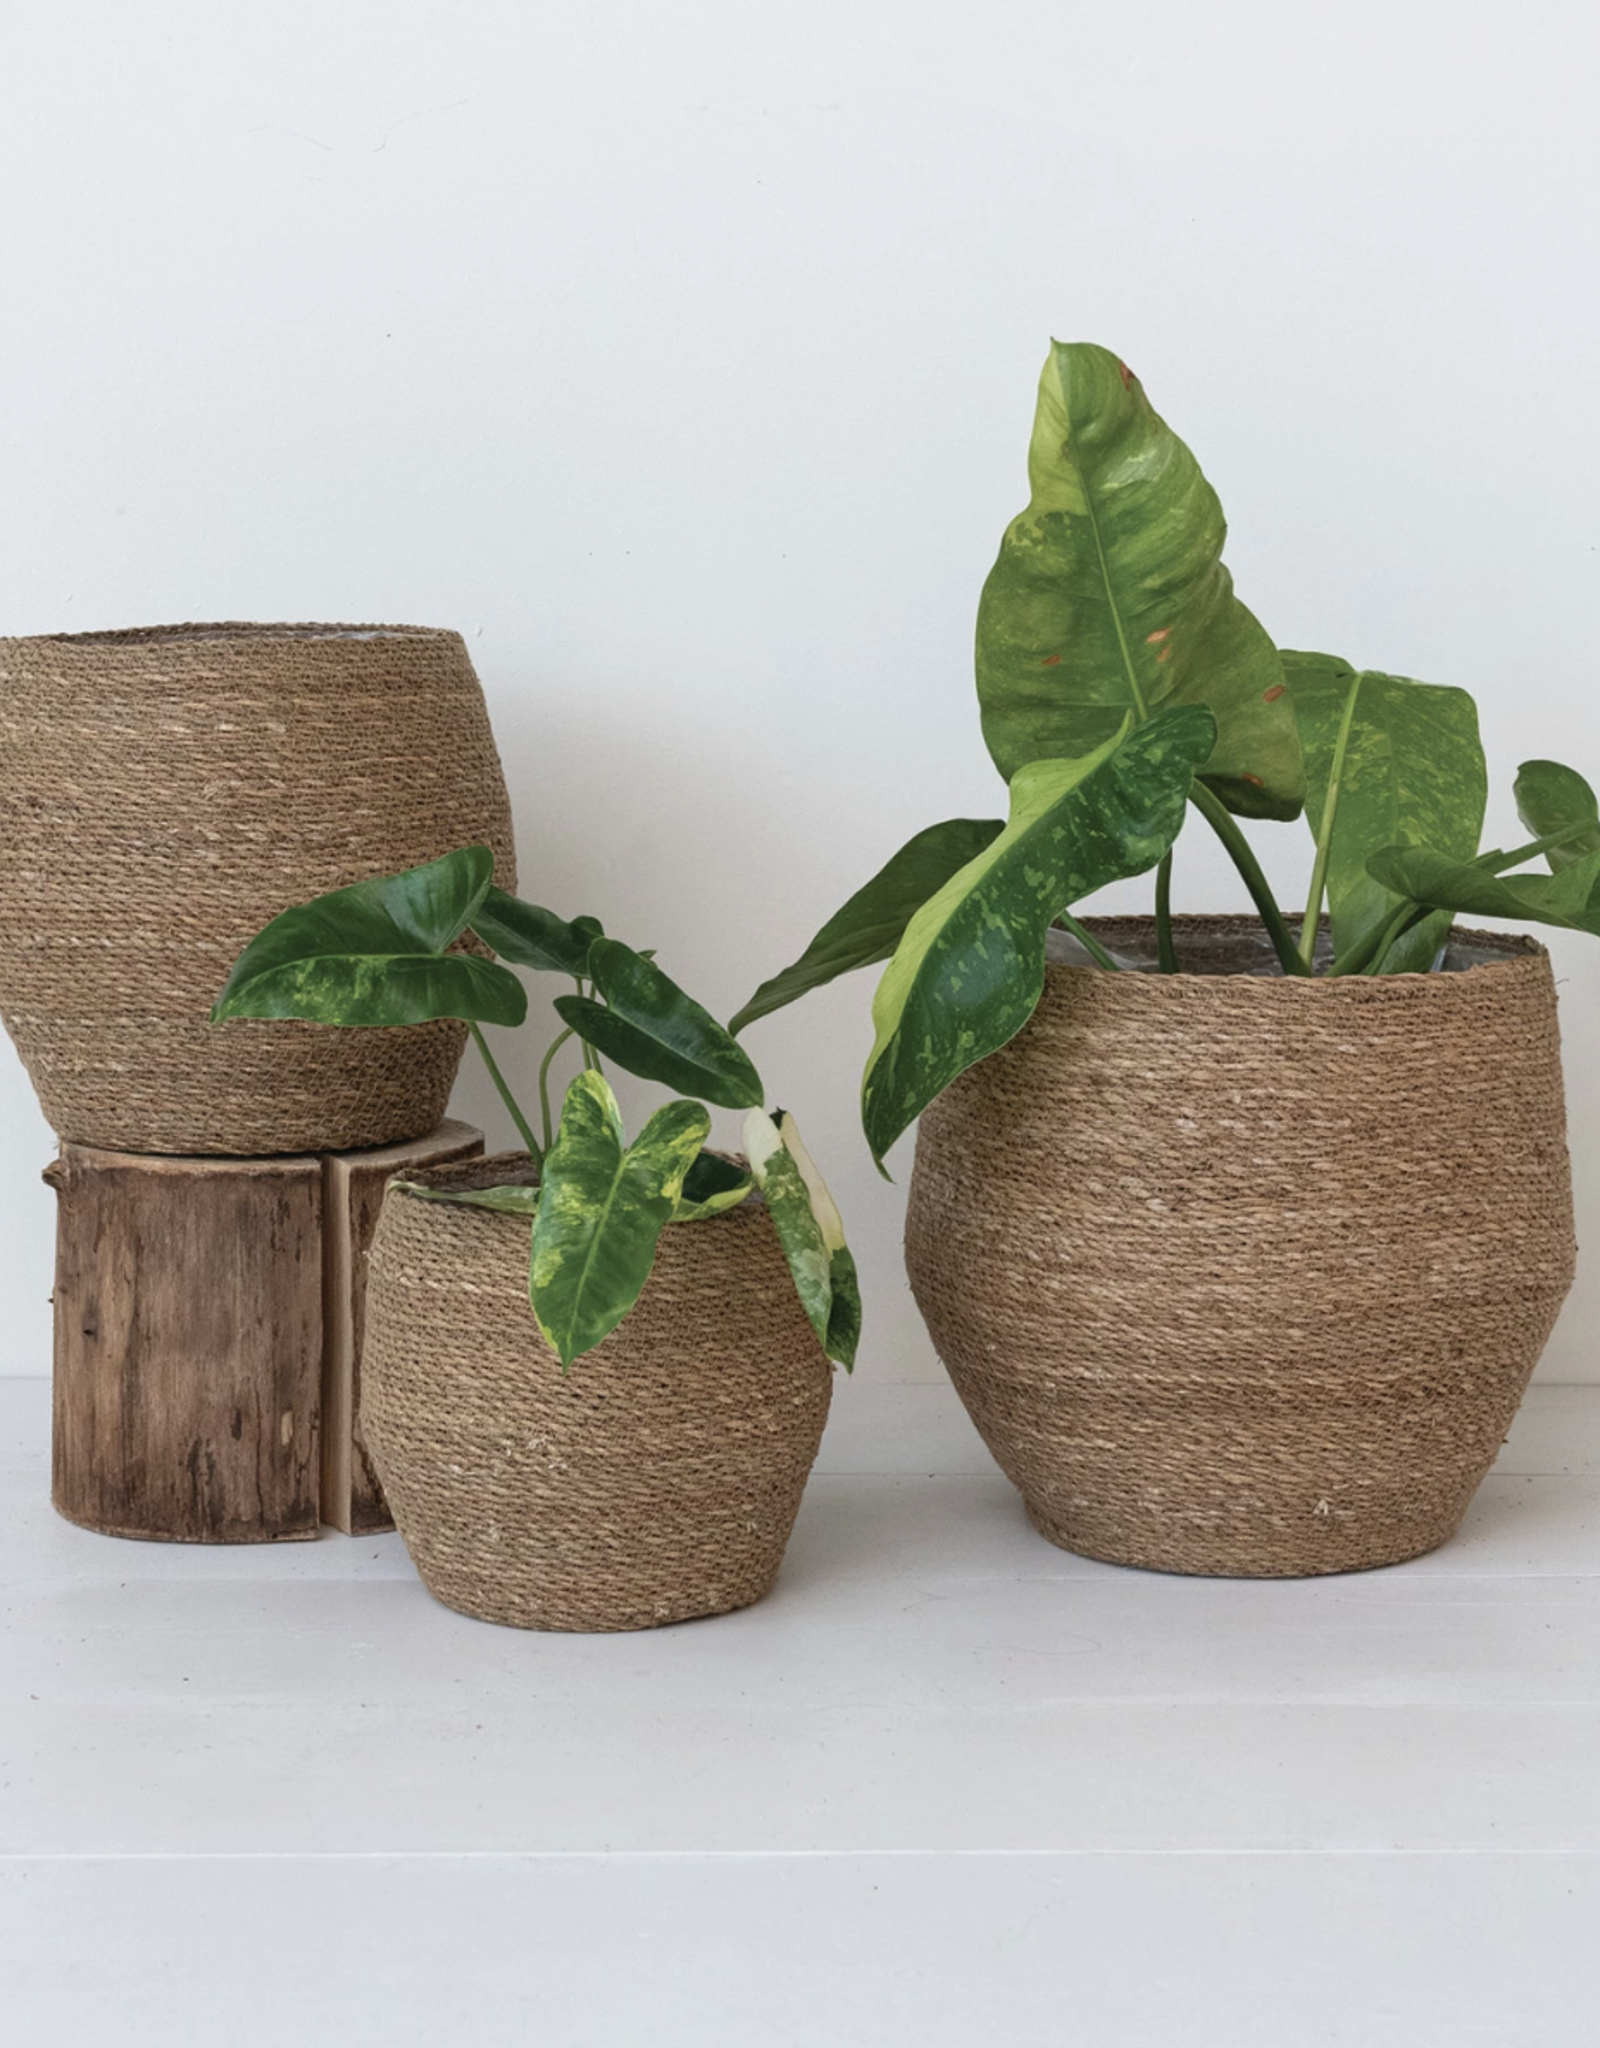 Decorative Woven Seagrass Baskets w/ Plastic Lining